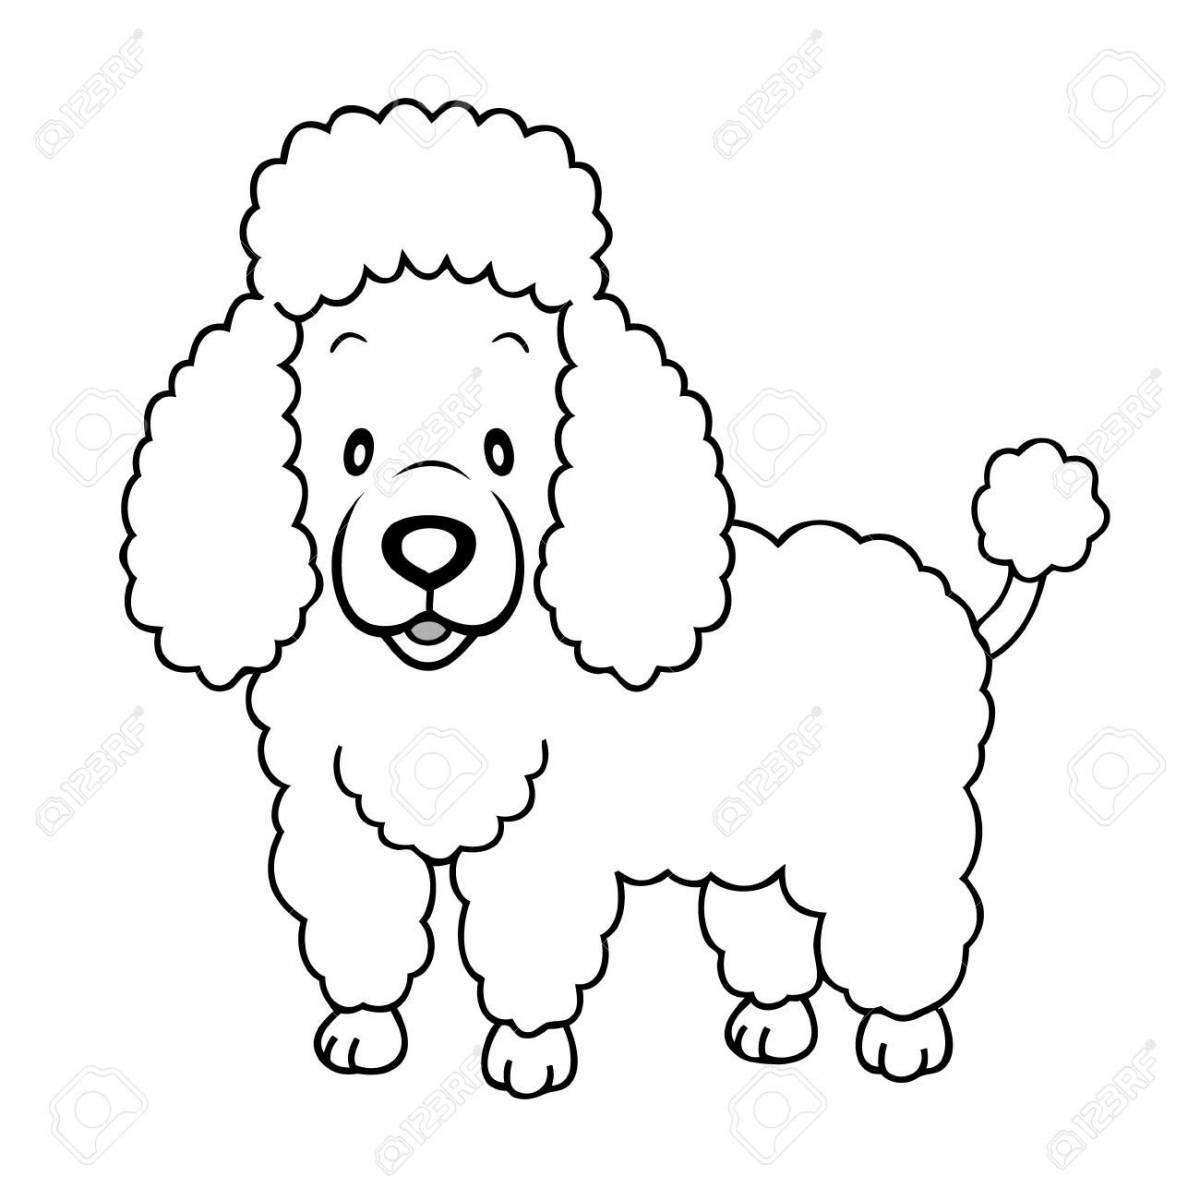 Glowing poodle coloring page for kids